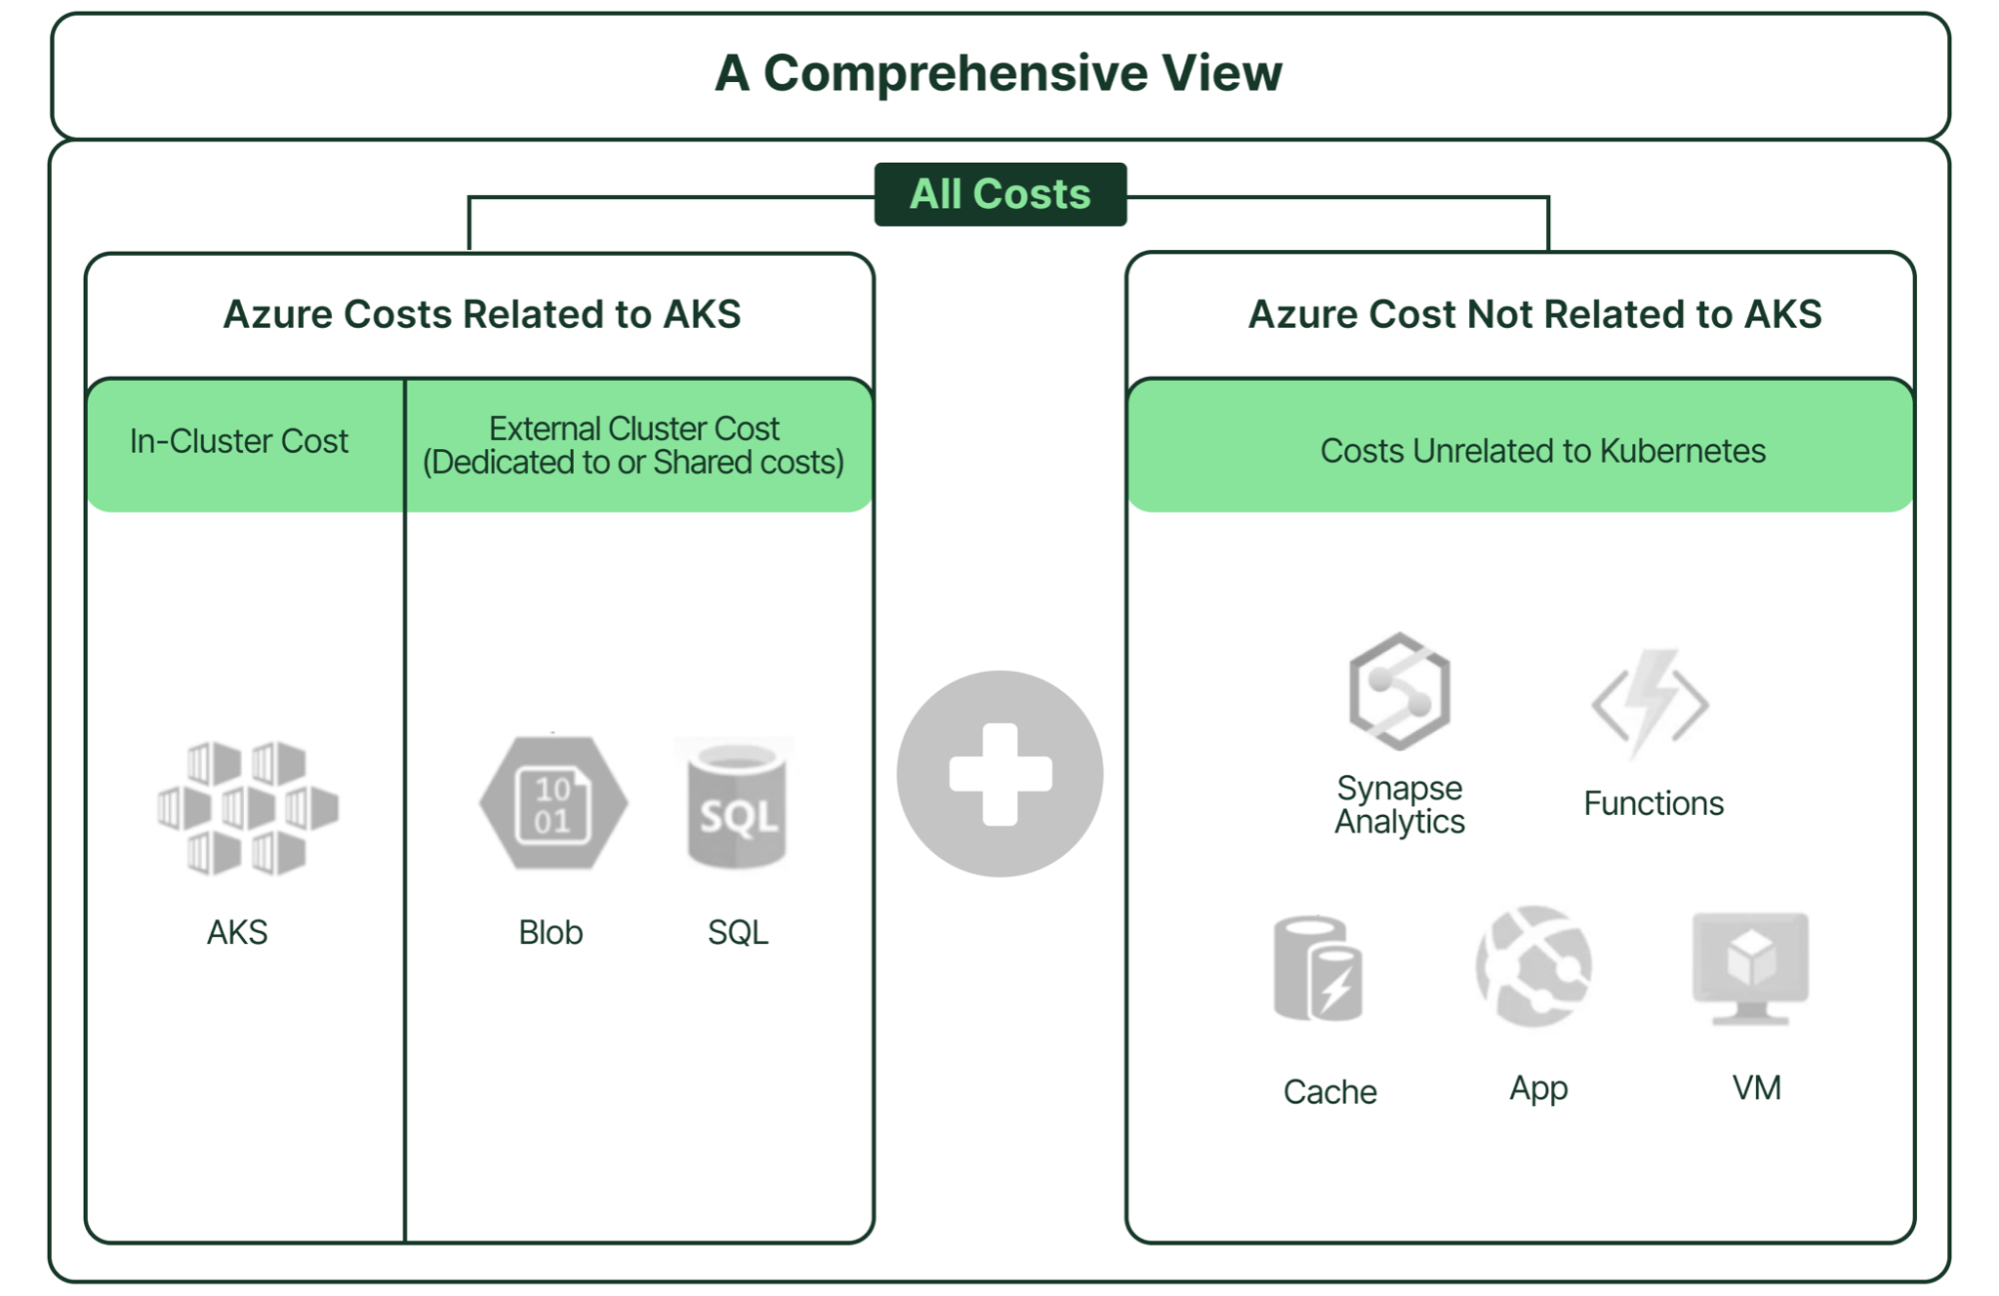 A comprehensive view should include AKS-related and non-AKS-related costs